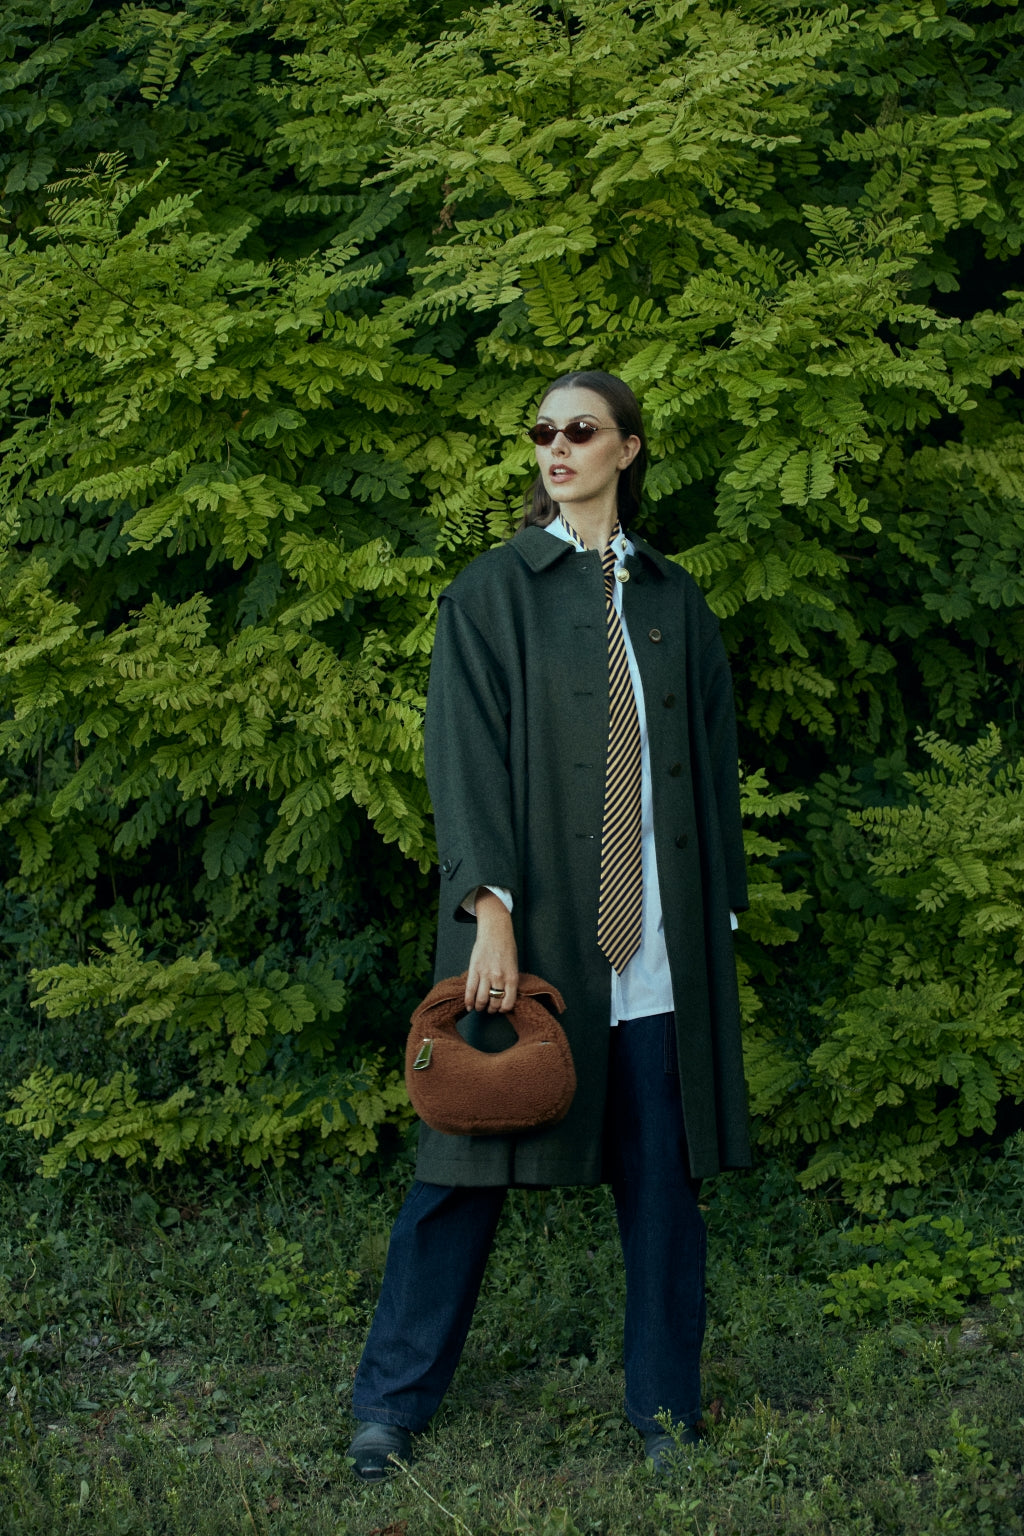 Woman in stylish oversized coat, sunglasses, and tie holding a handbag in front of lush green foliage